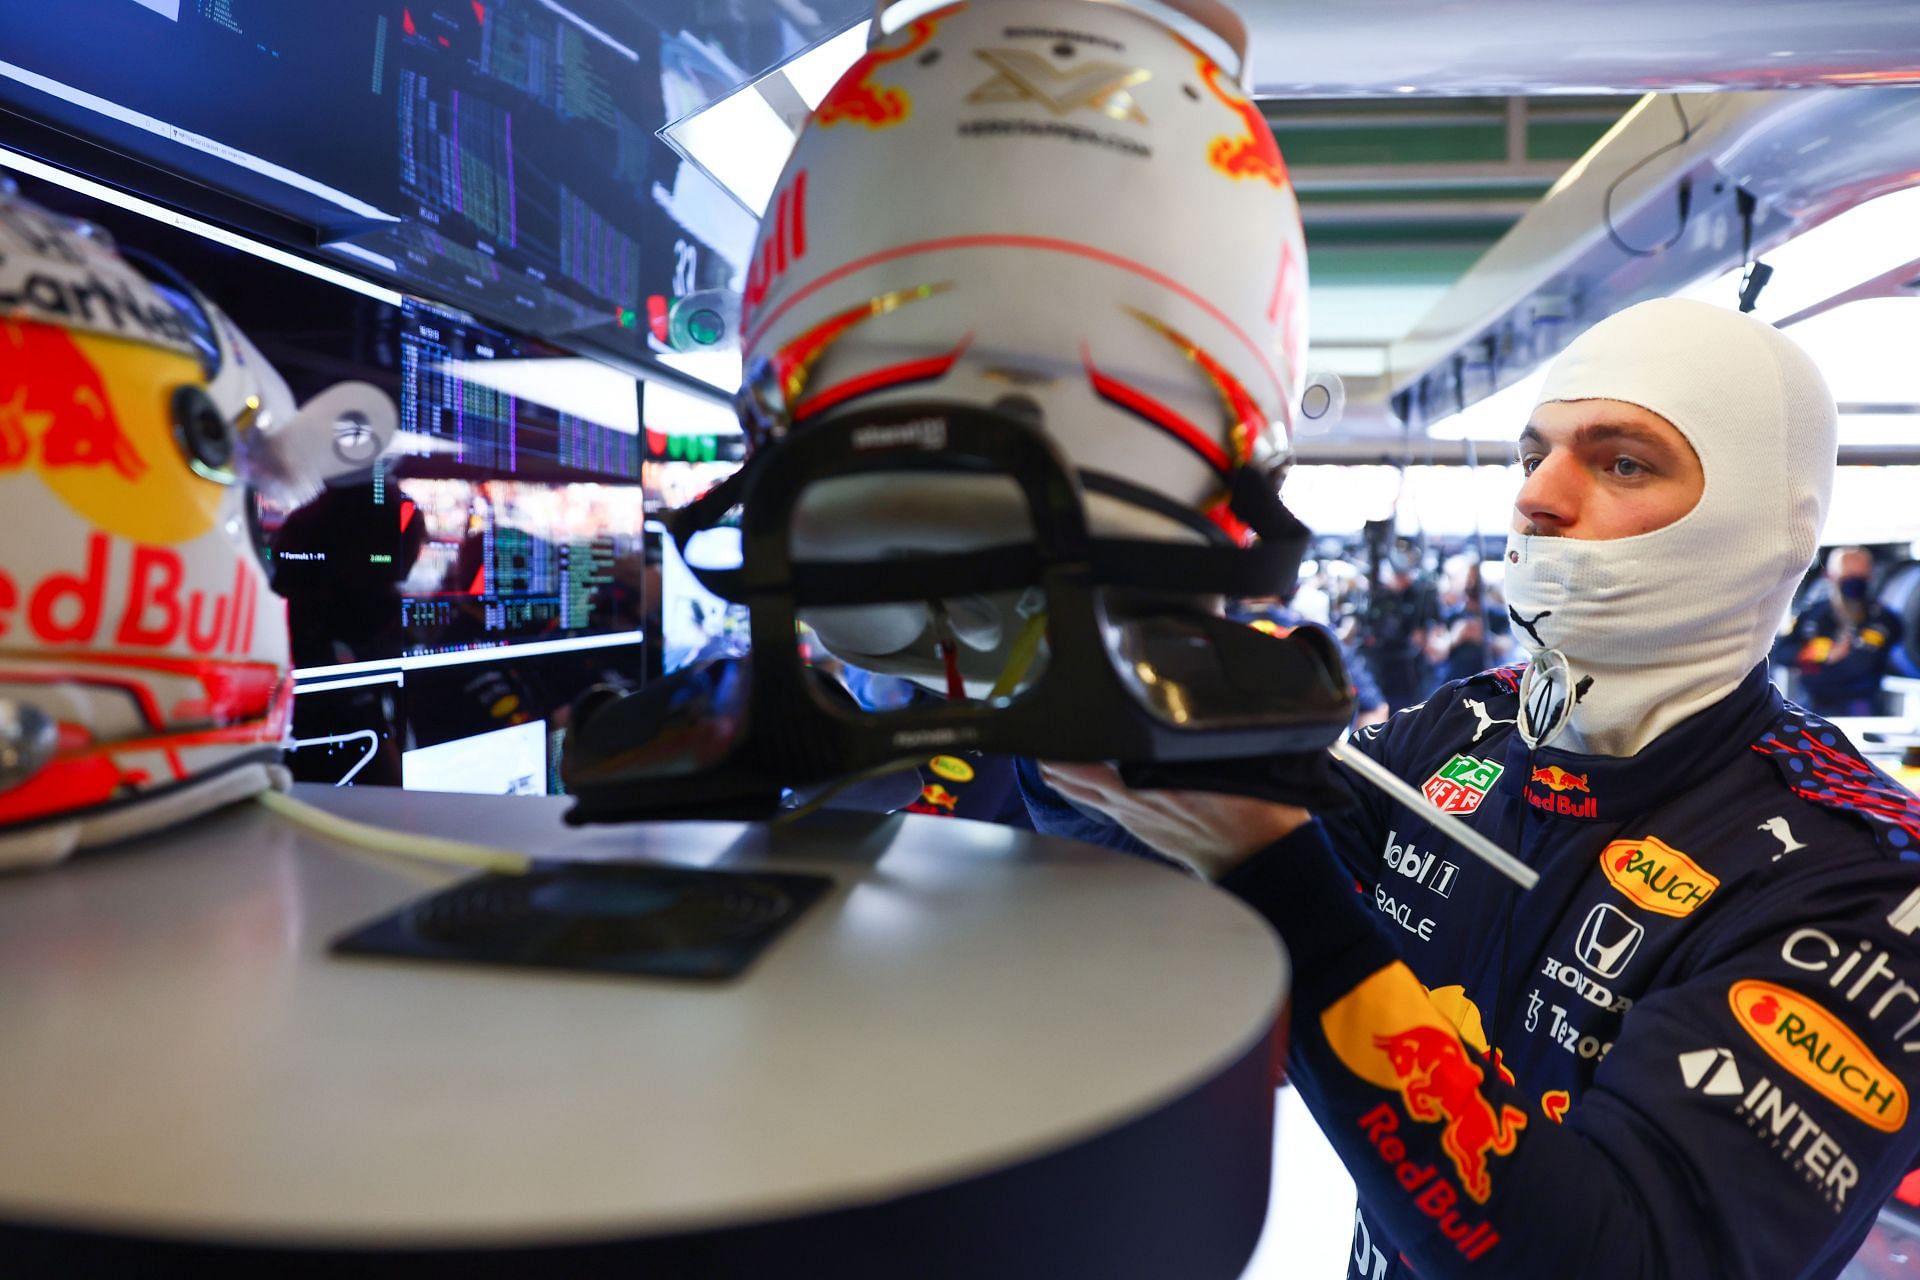 Max Verstappen prepares in the garage ahead of the 2021 Abu Dhabi GP. (Photo by Mark Thompson/Getty Images)